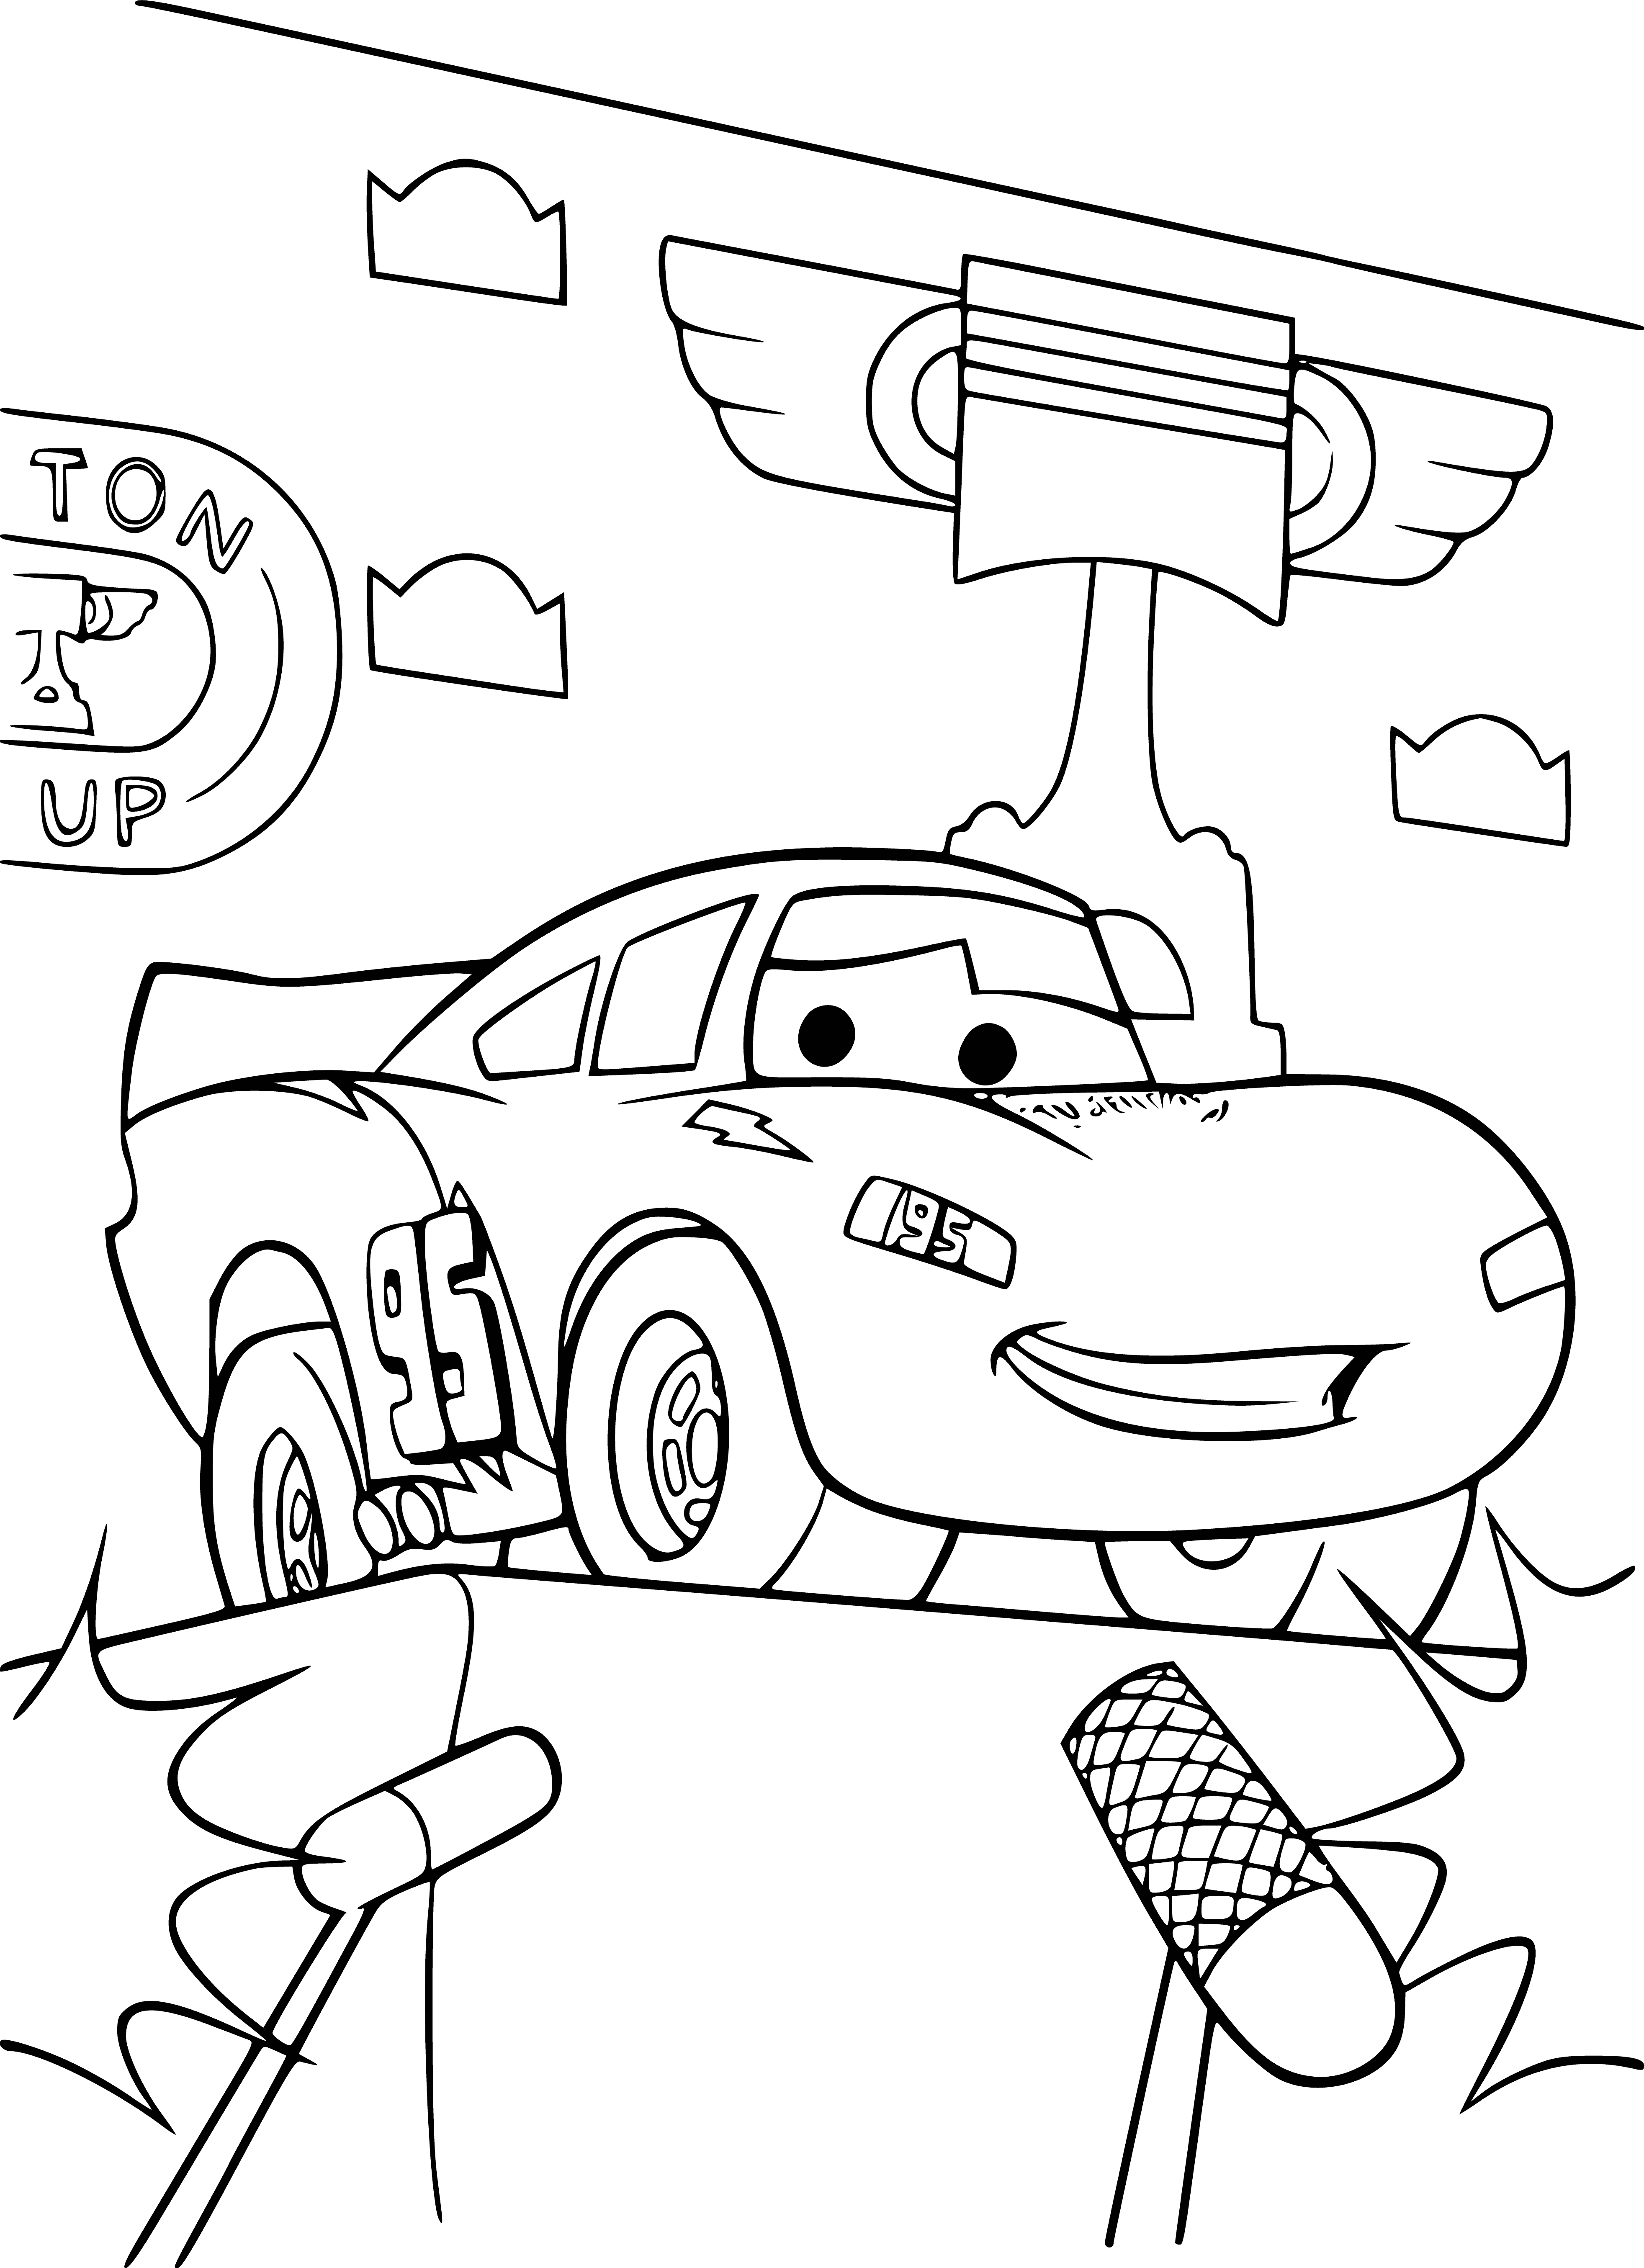 coloring page: Cars in coloring page are various colors; front one is blue #95 & others not as visible.